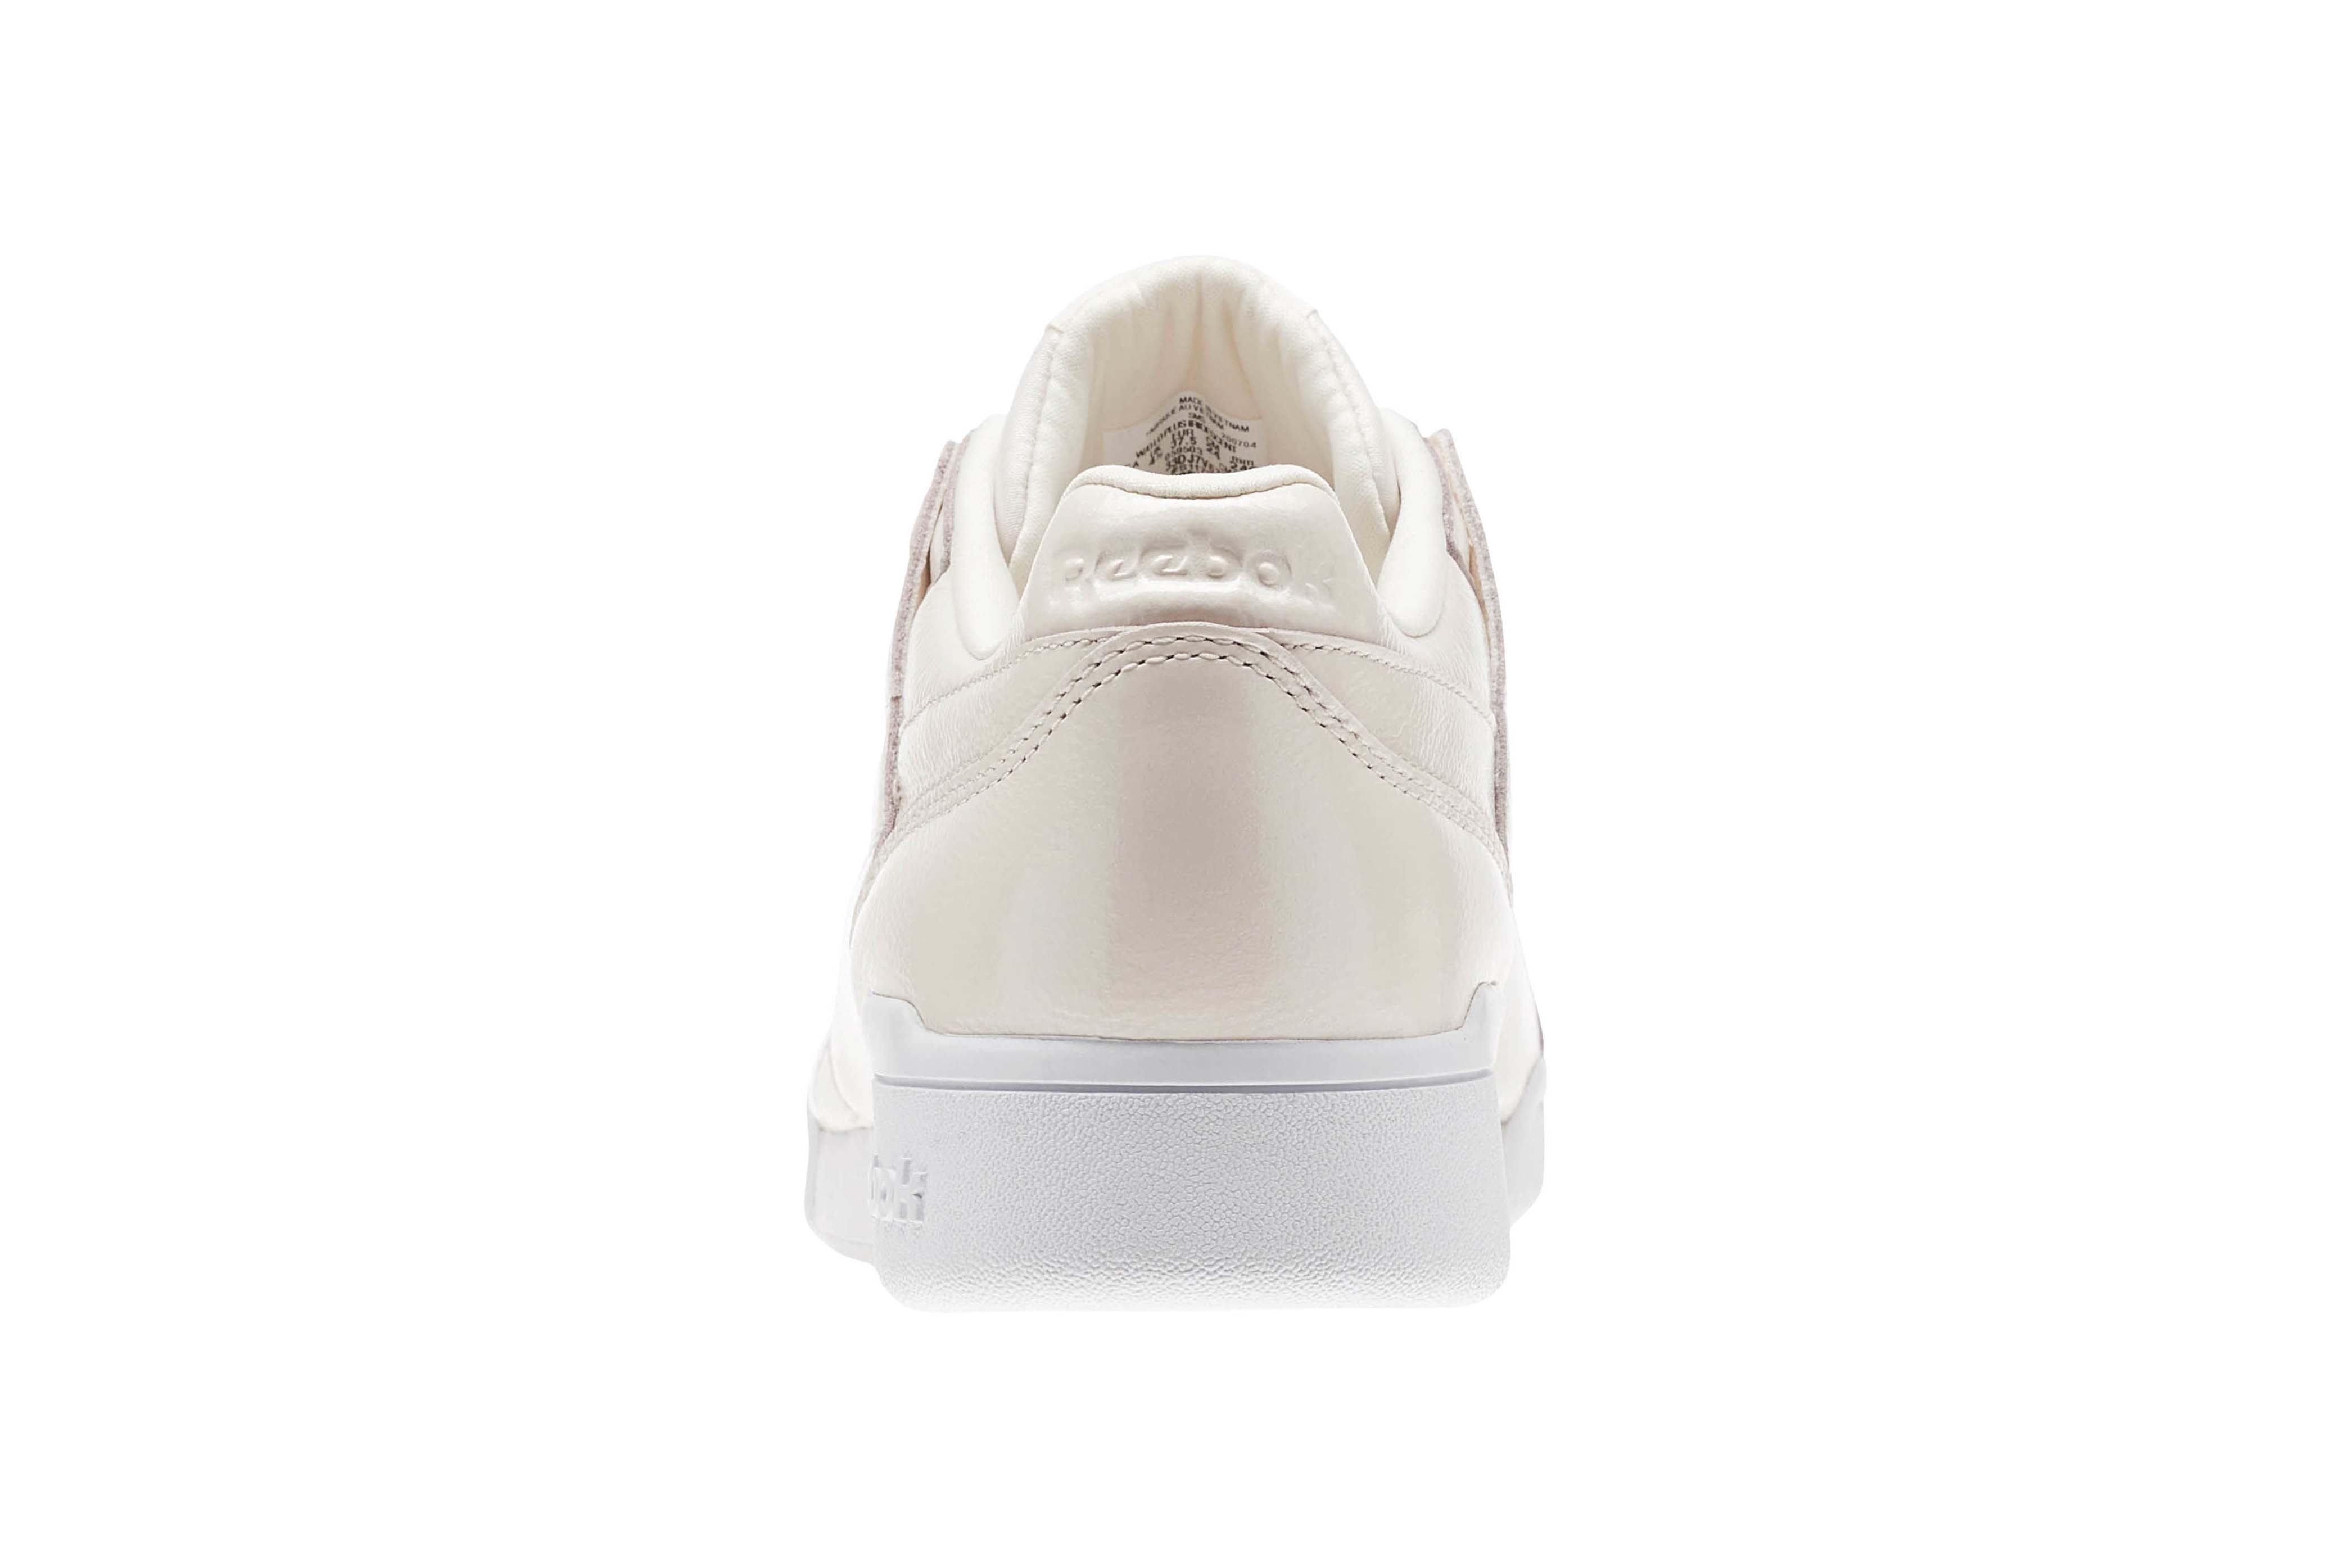 Reebok Workout Plus in "Pale Pink/White" Sneaker Shoe Iridescent Pearl Shine Classic Silhouette